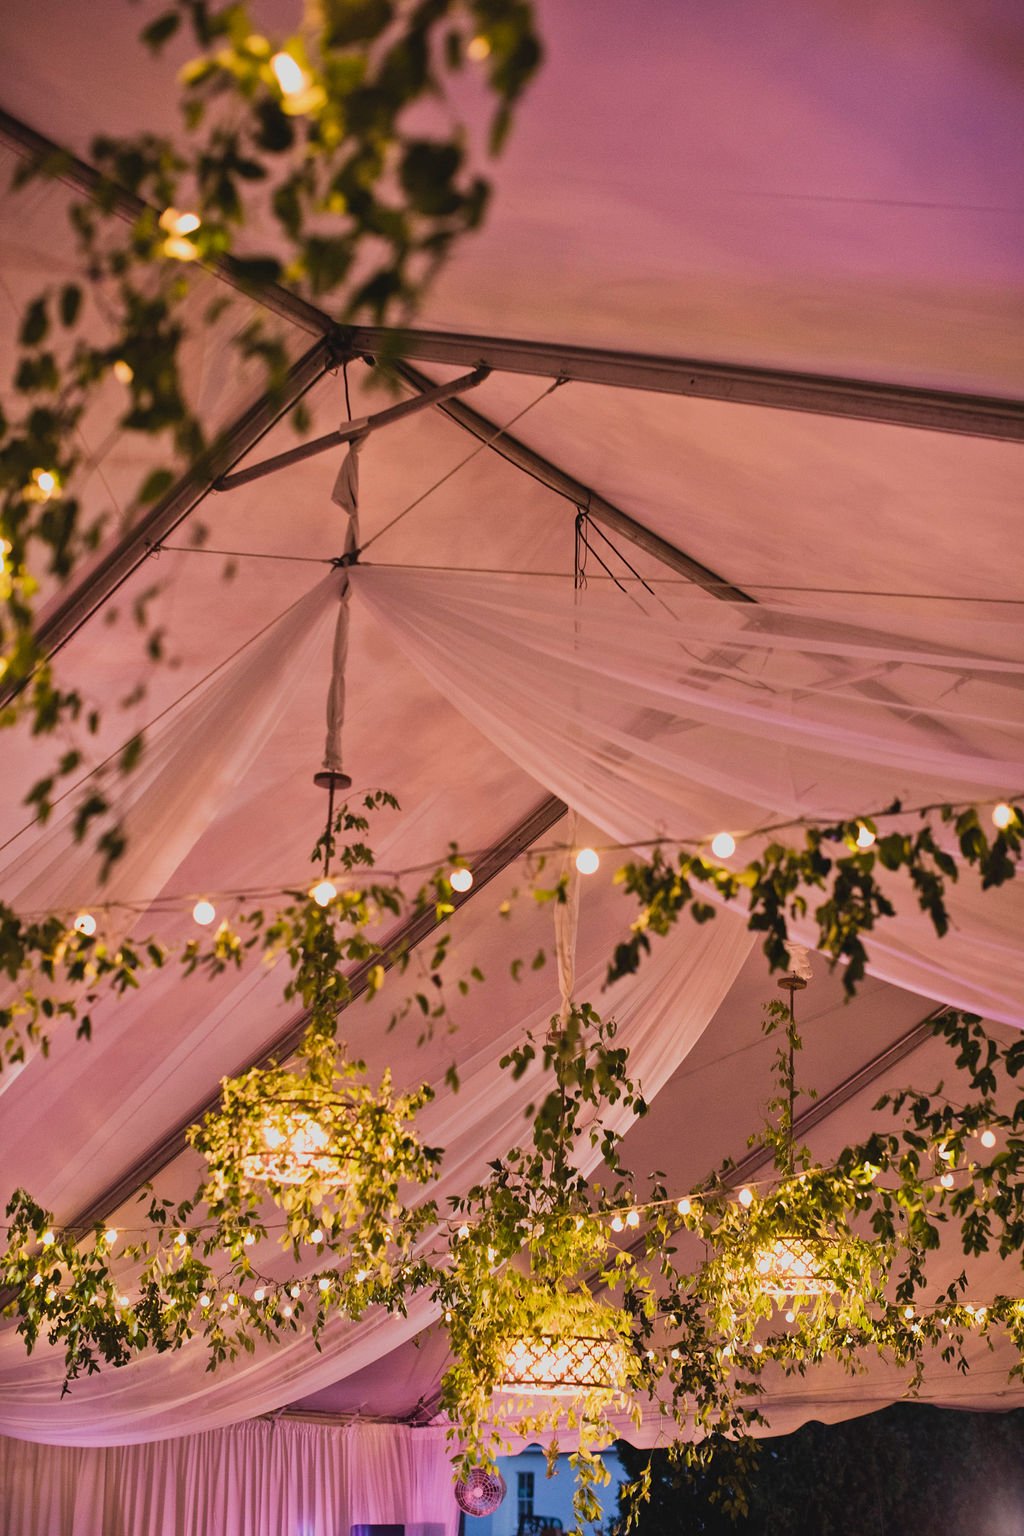 Gorgeous installations of smilax grew over the entrance to the tent, on the chandeliers, and all throughout the reception creating a warm, natural atmosphere. Designed by Rosemary and Finch in Nashville, TN.